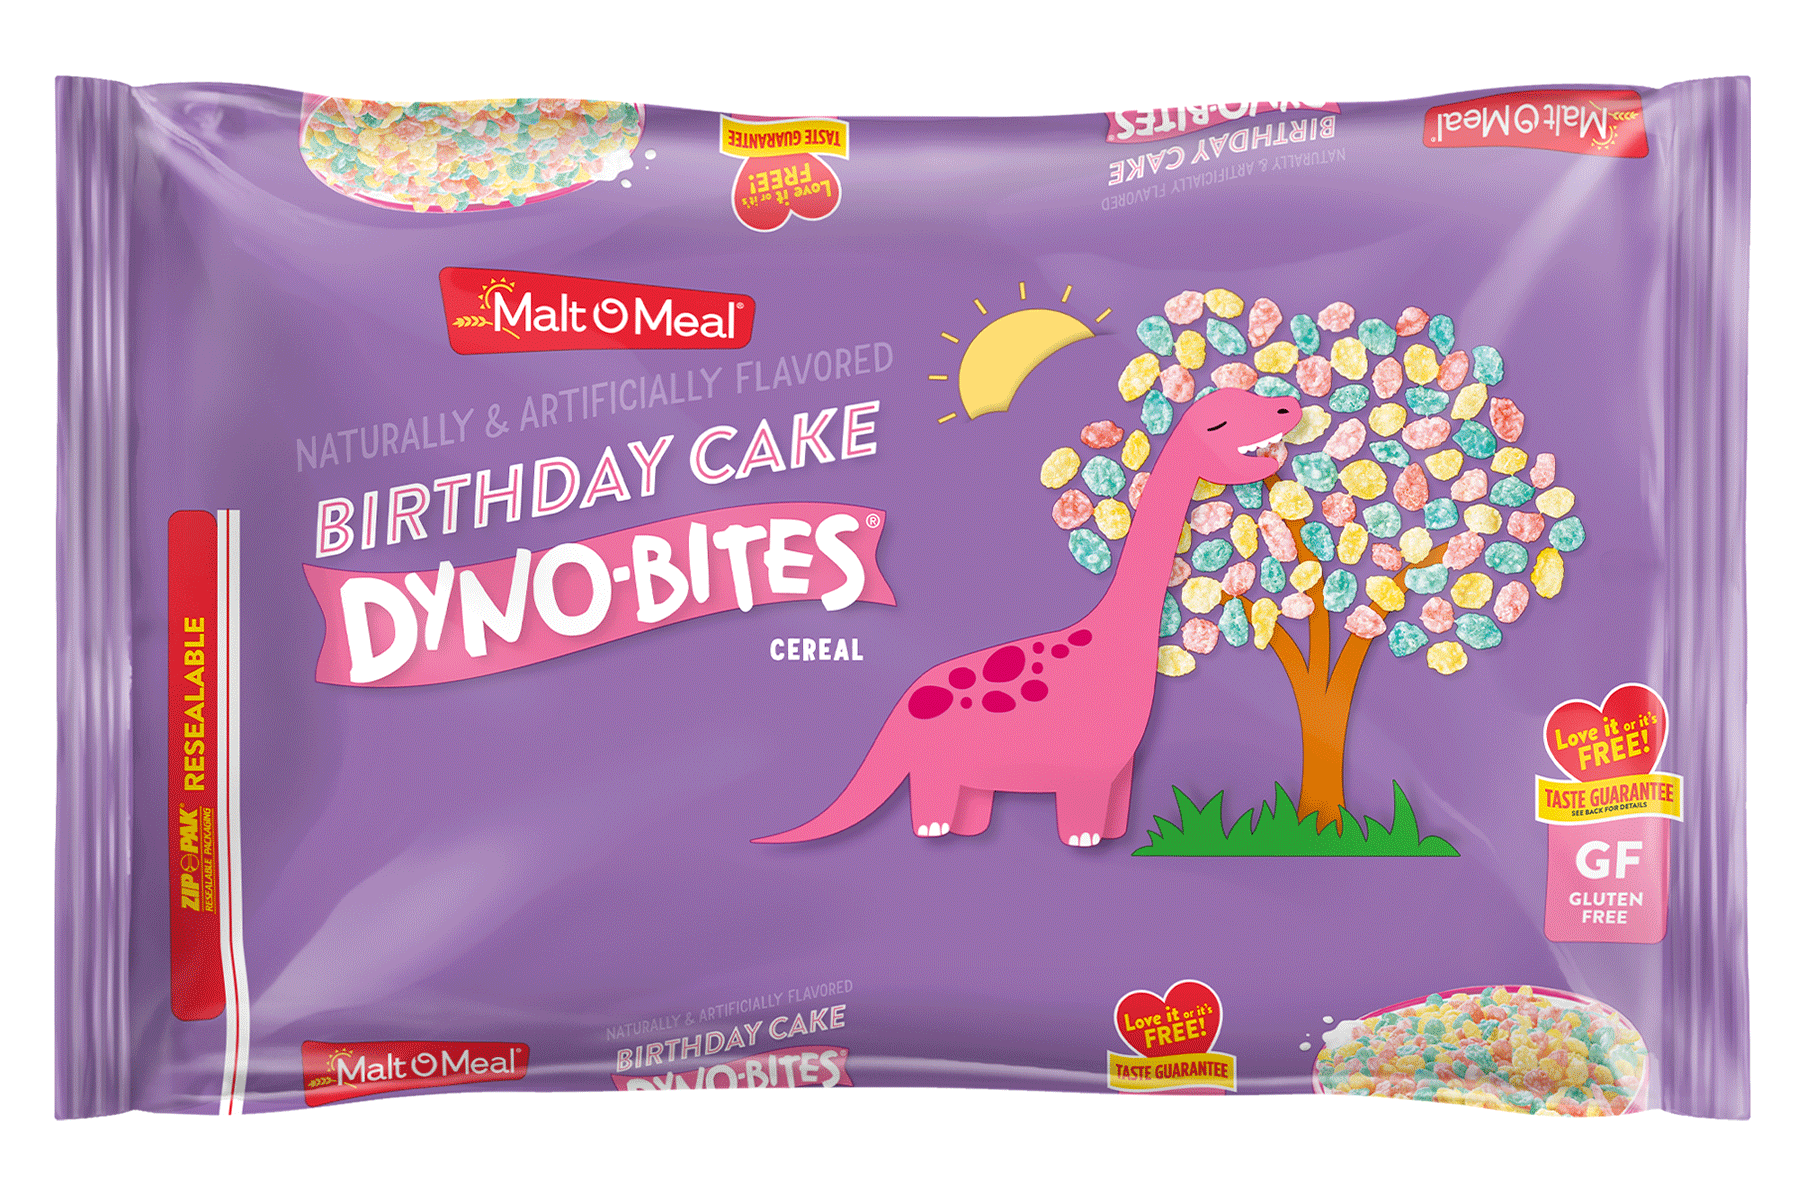 Birthday Cake Dyno-Bites cereal packaging